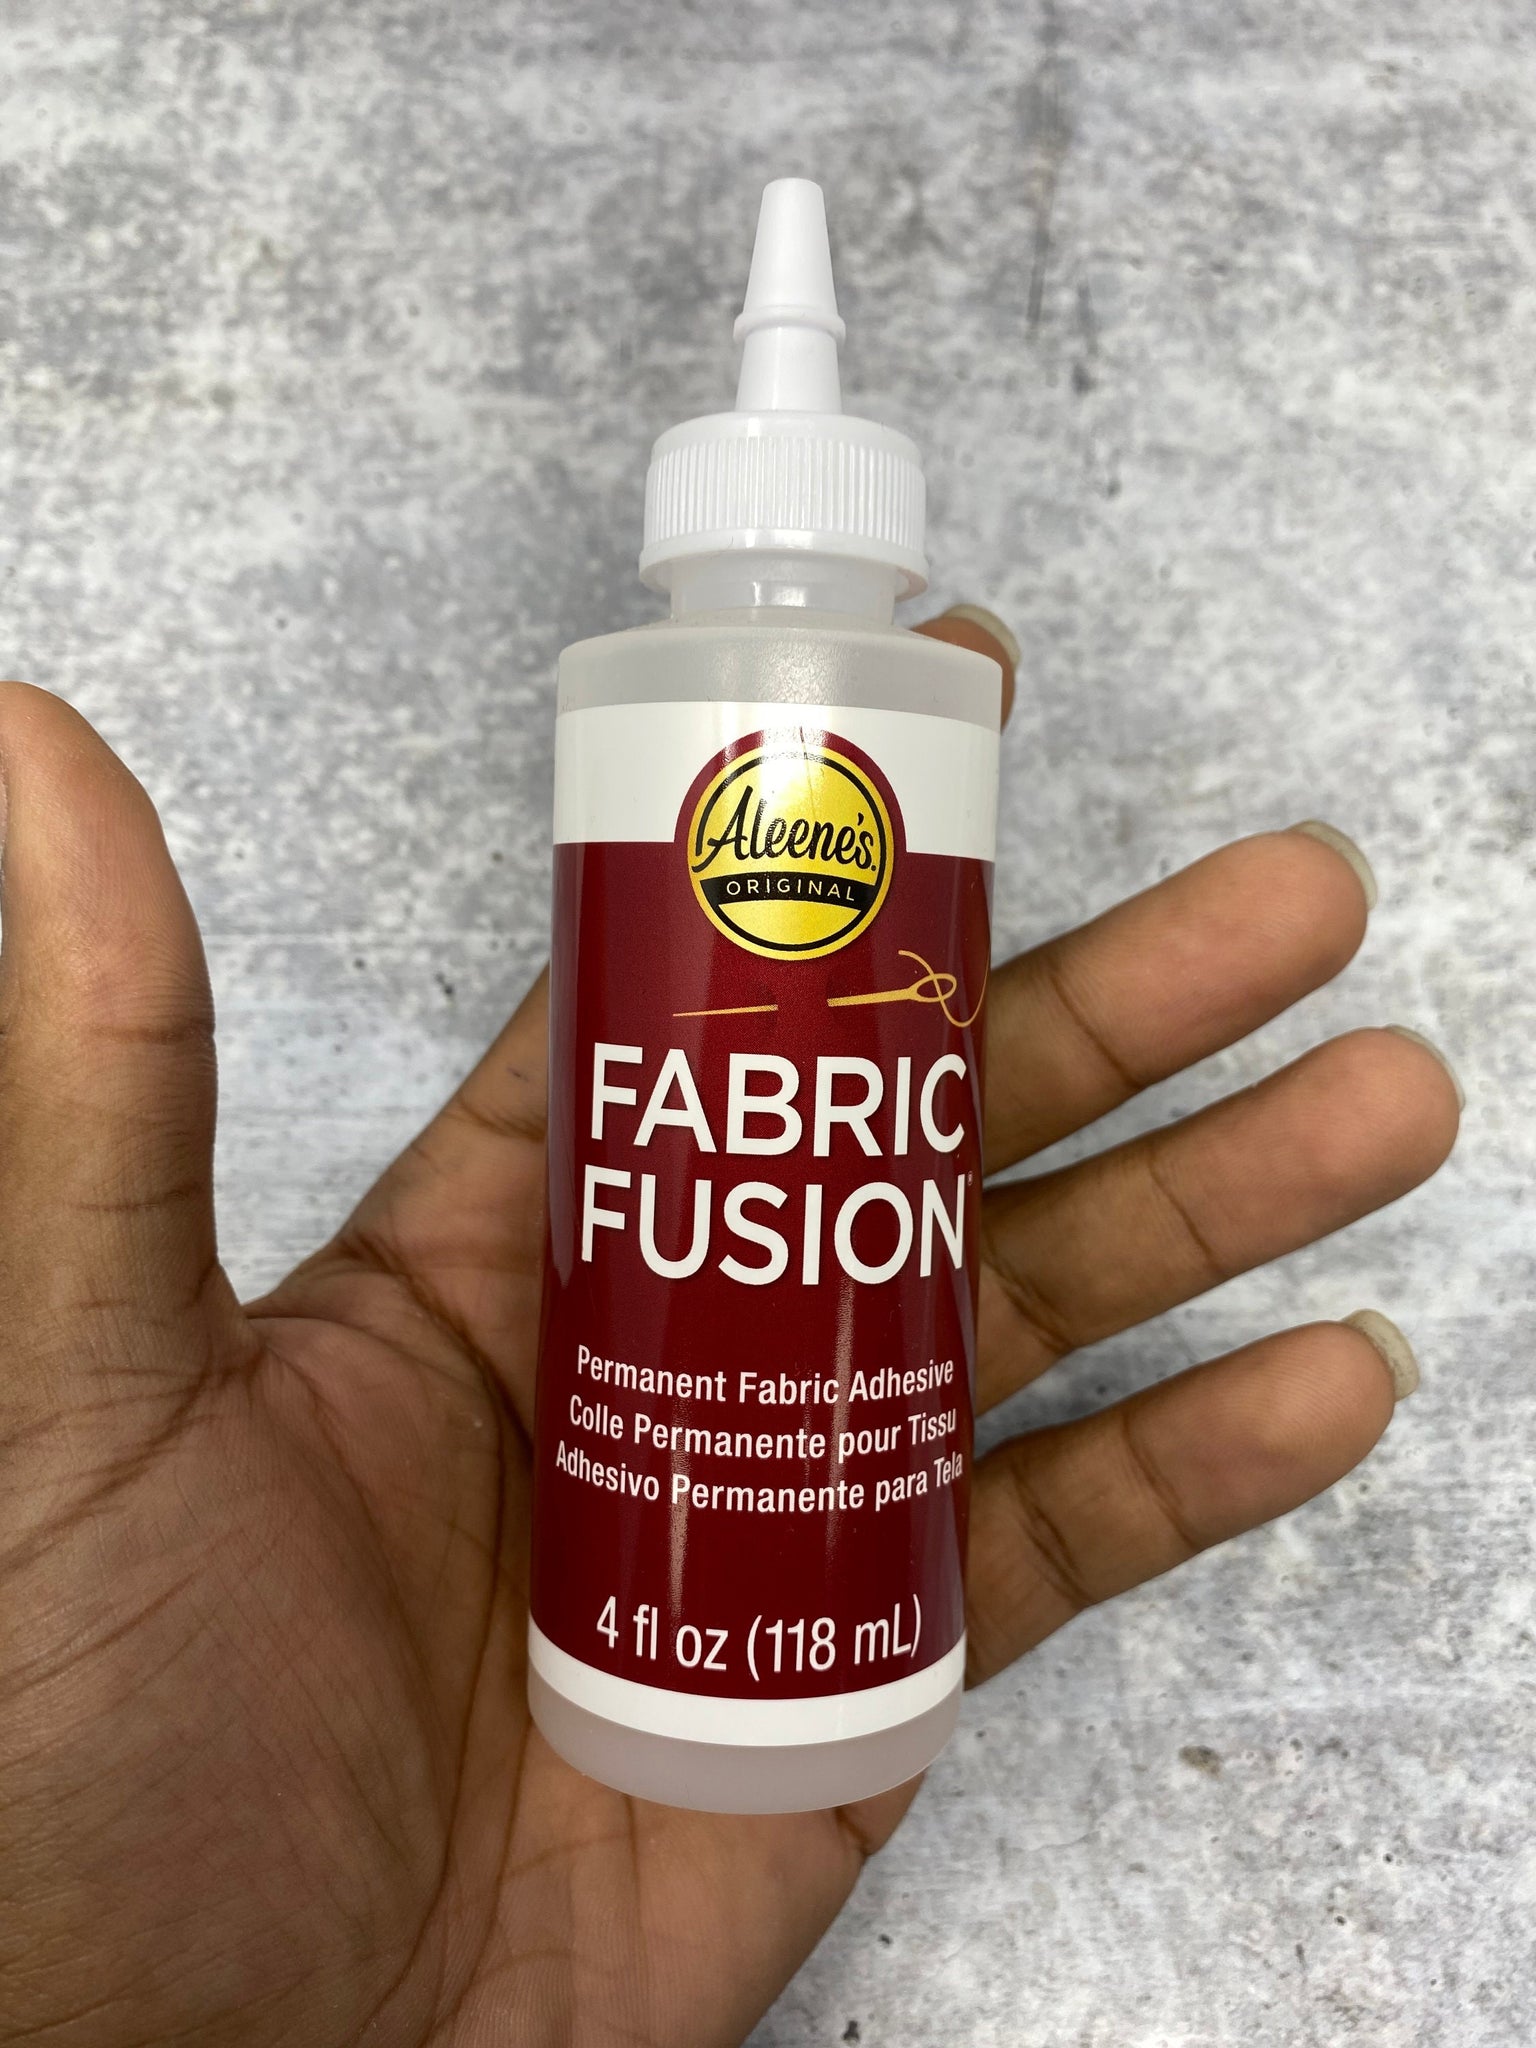 NEW, Fabric Fusion, Permanent Fabric Adhesive, Great on clothing